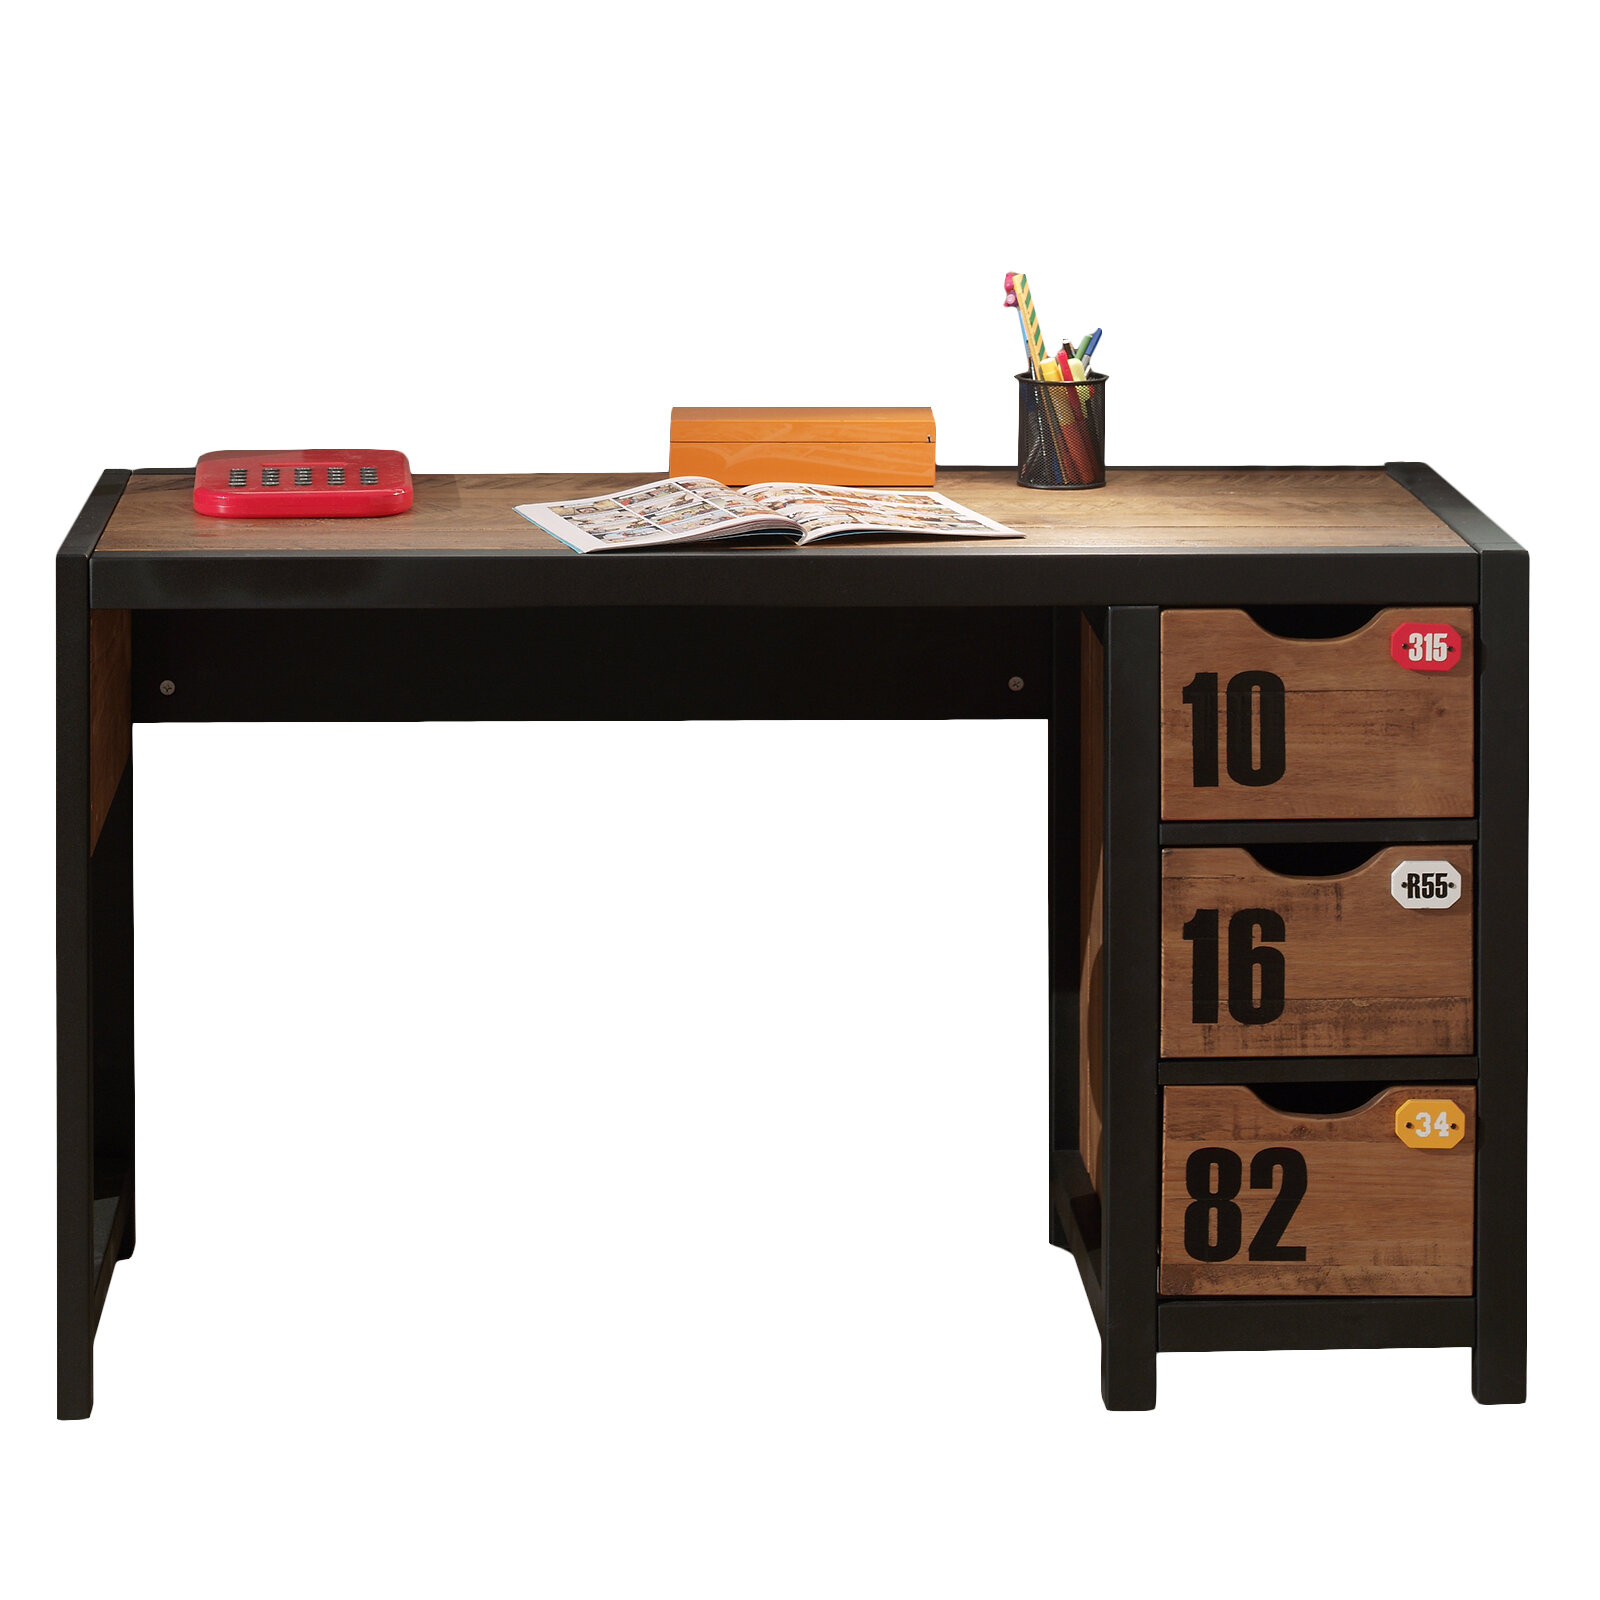 Isabelle Max Bright Writing Desk Reviews Wayfair Co Uk